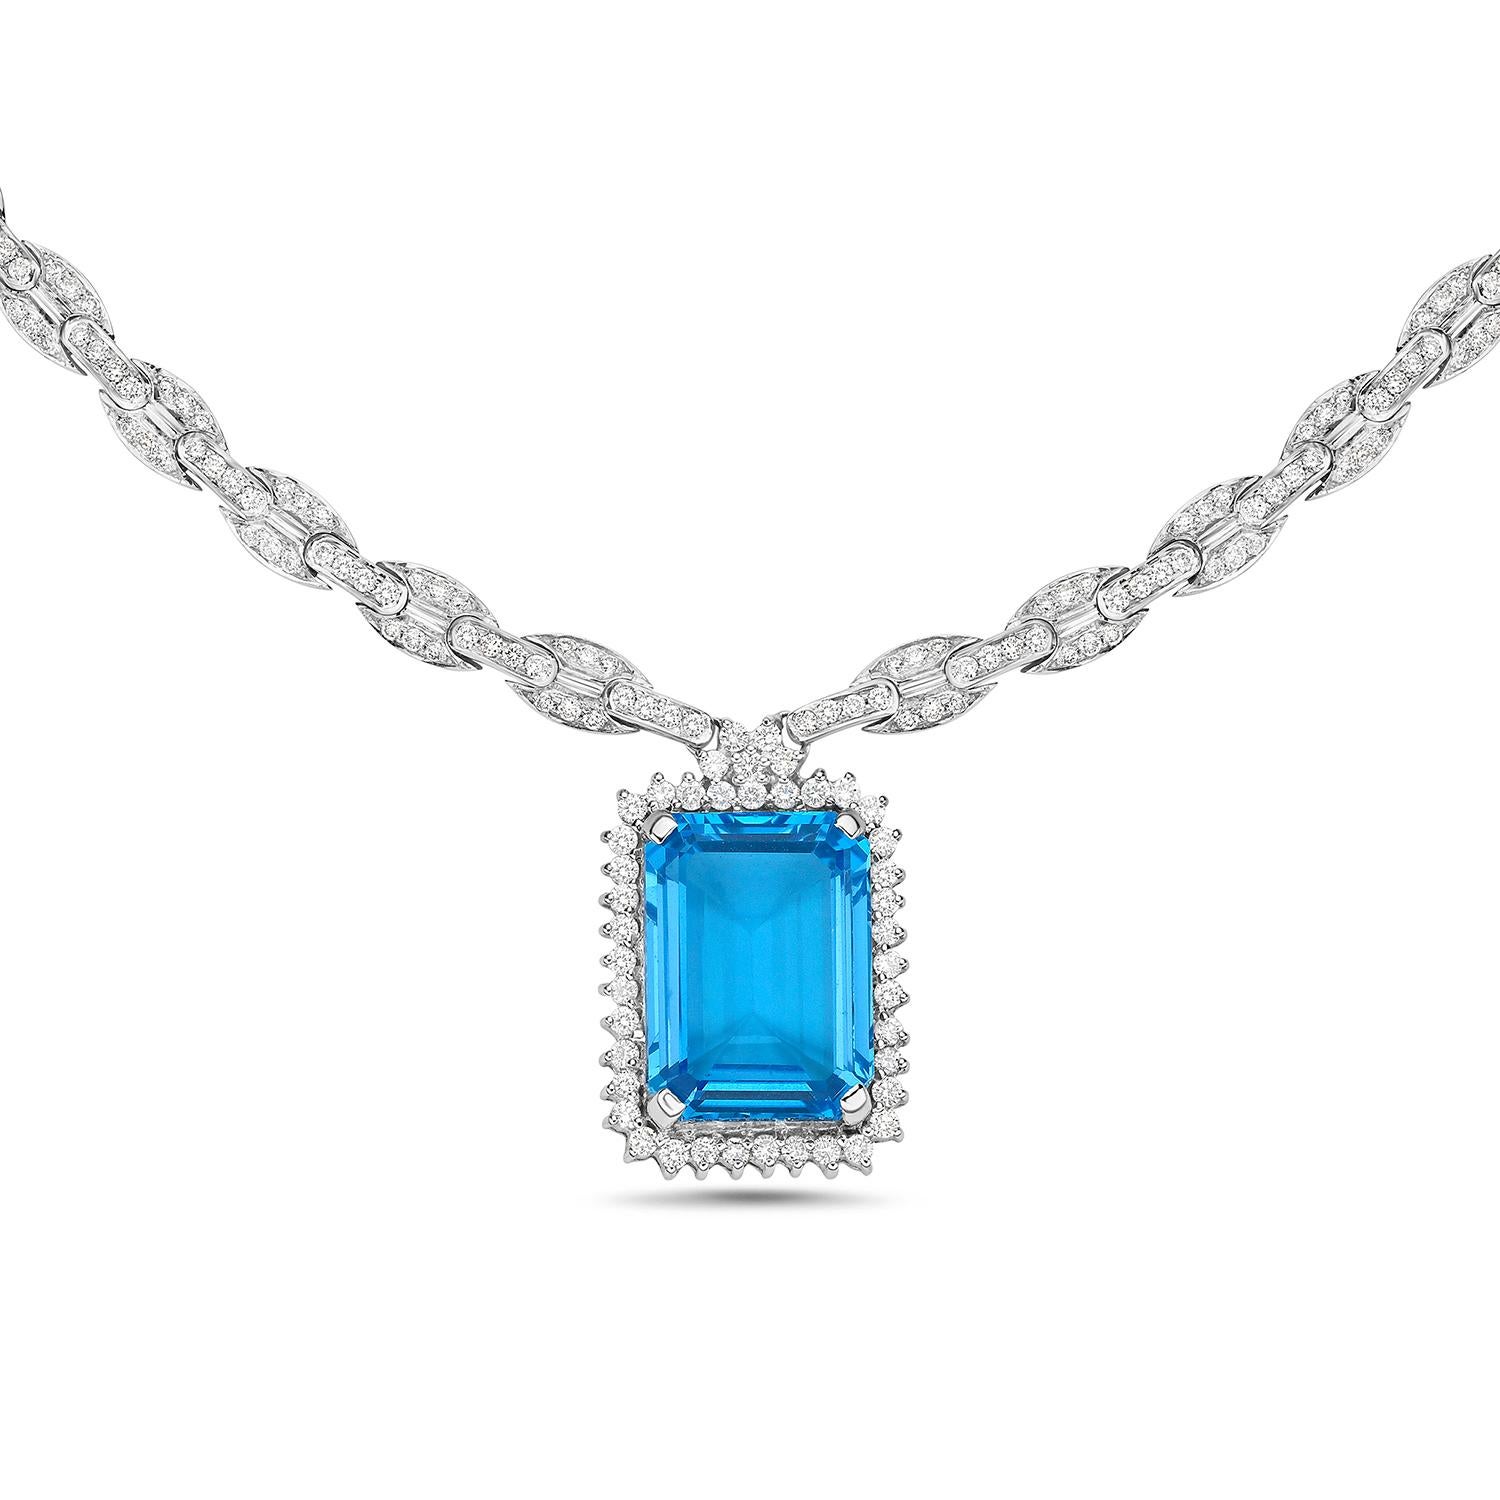 Mixed Cut Octogen Cut Blue Topaz Necklace Linked with Pave Diamonds Made in 18k White Gold For Sale